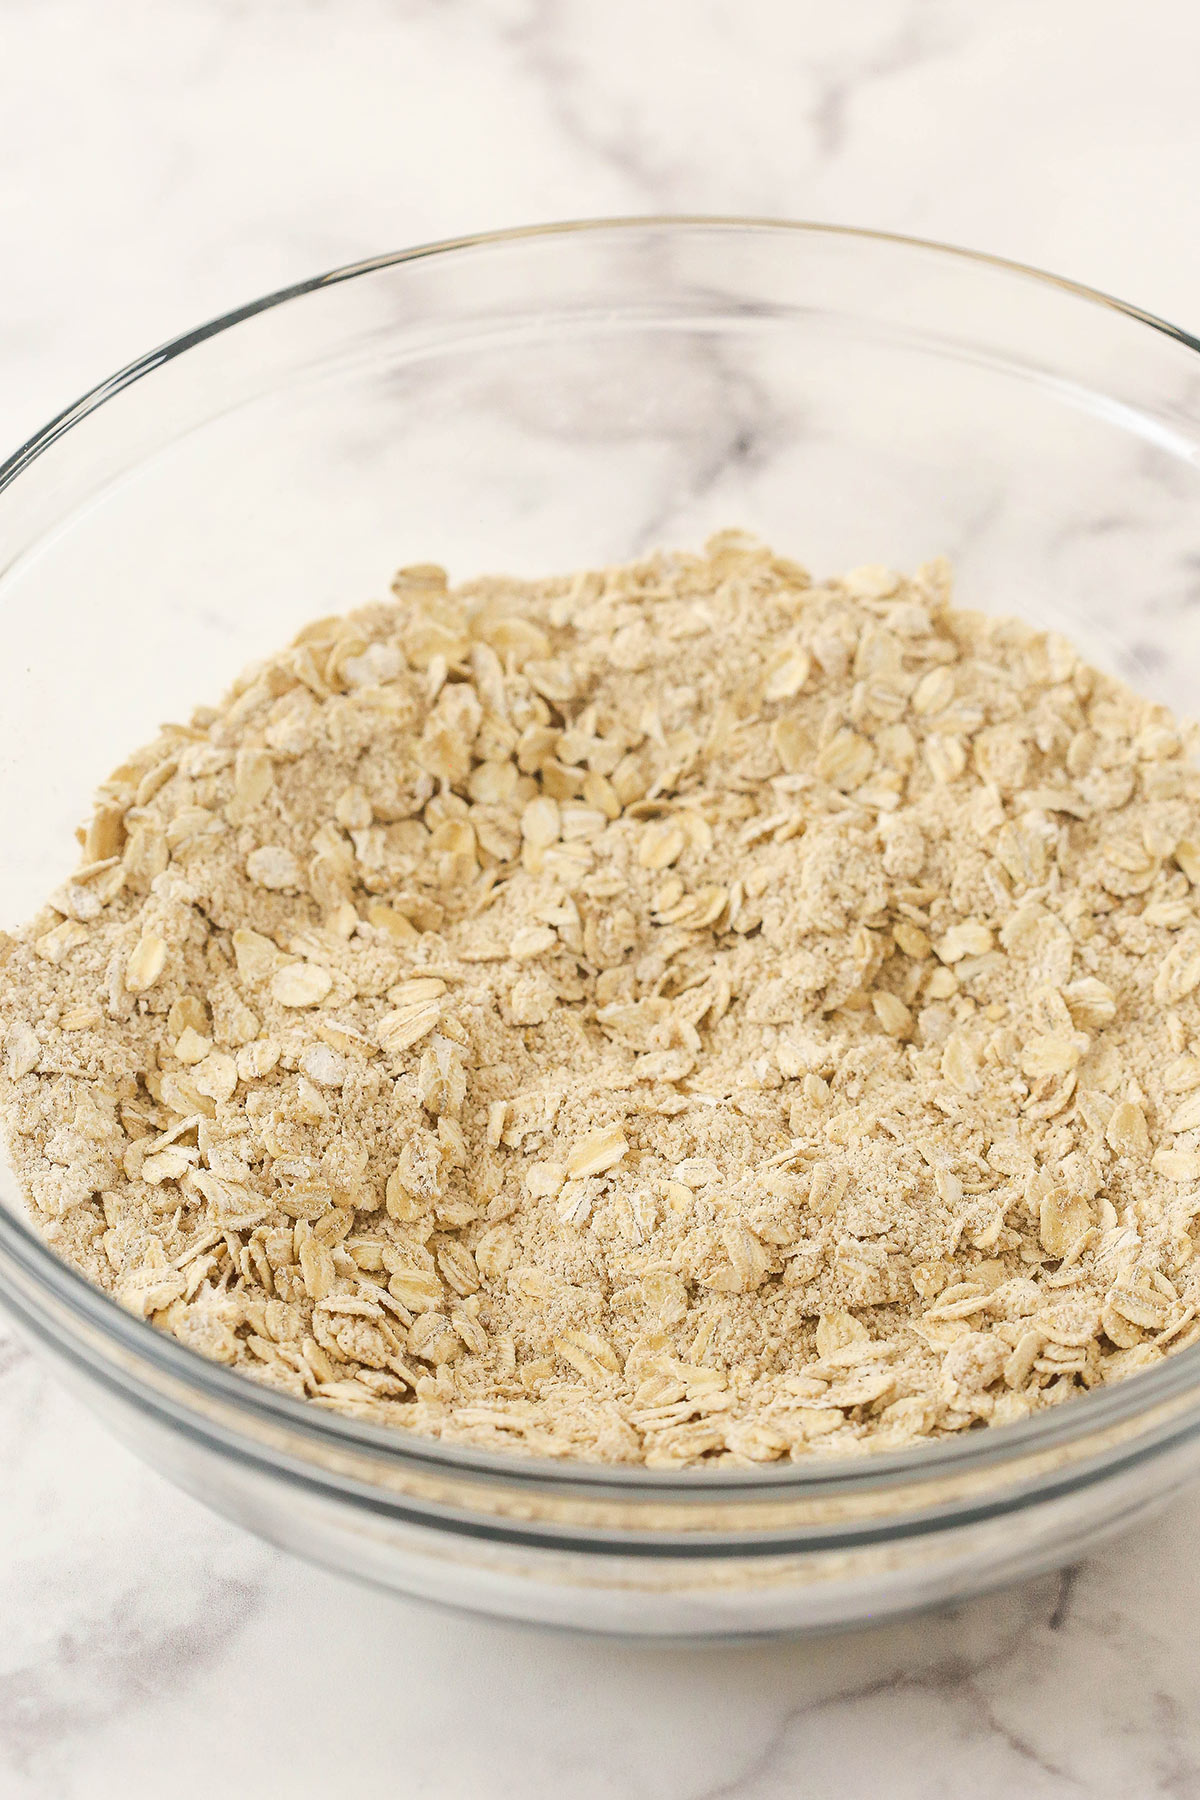 The flour, oats, brown sugar, cinnamon and salt combined in a glass bowl.